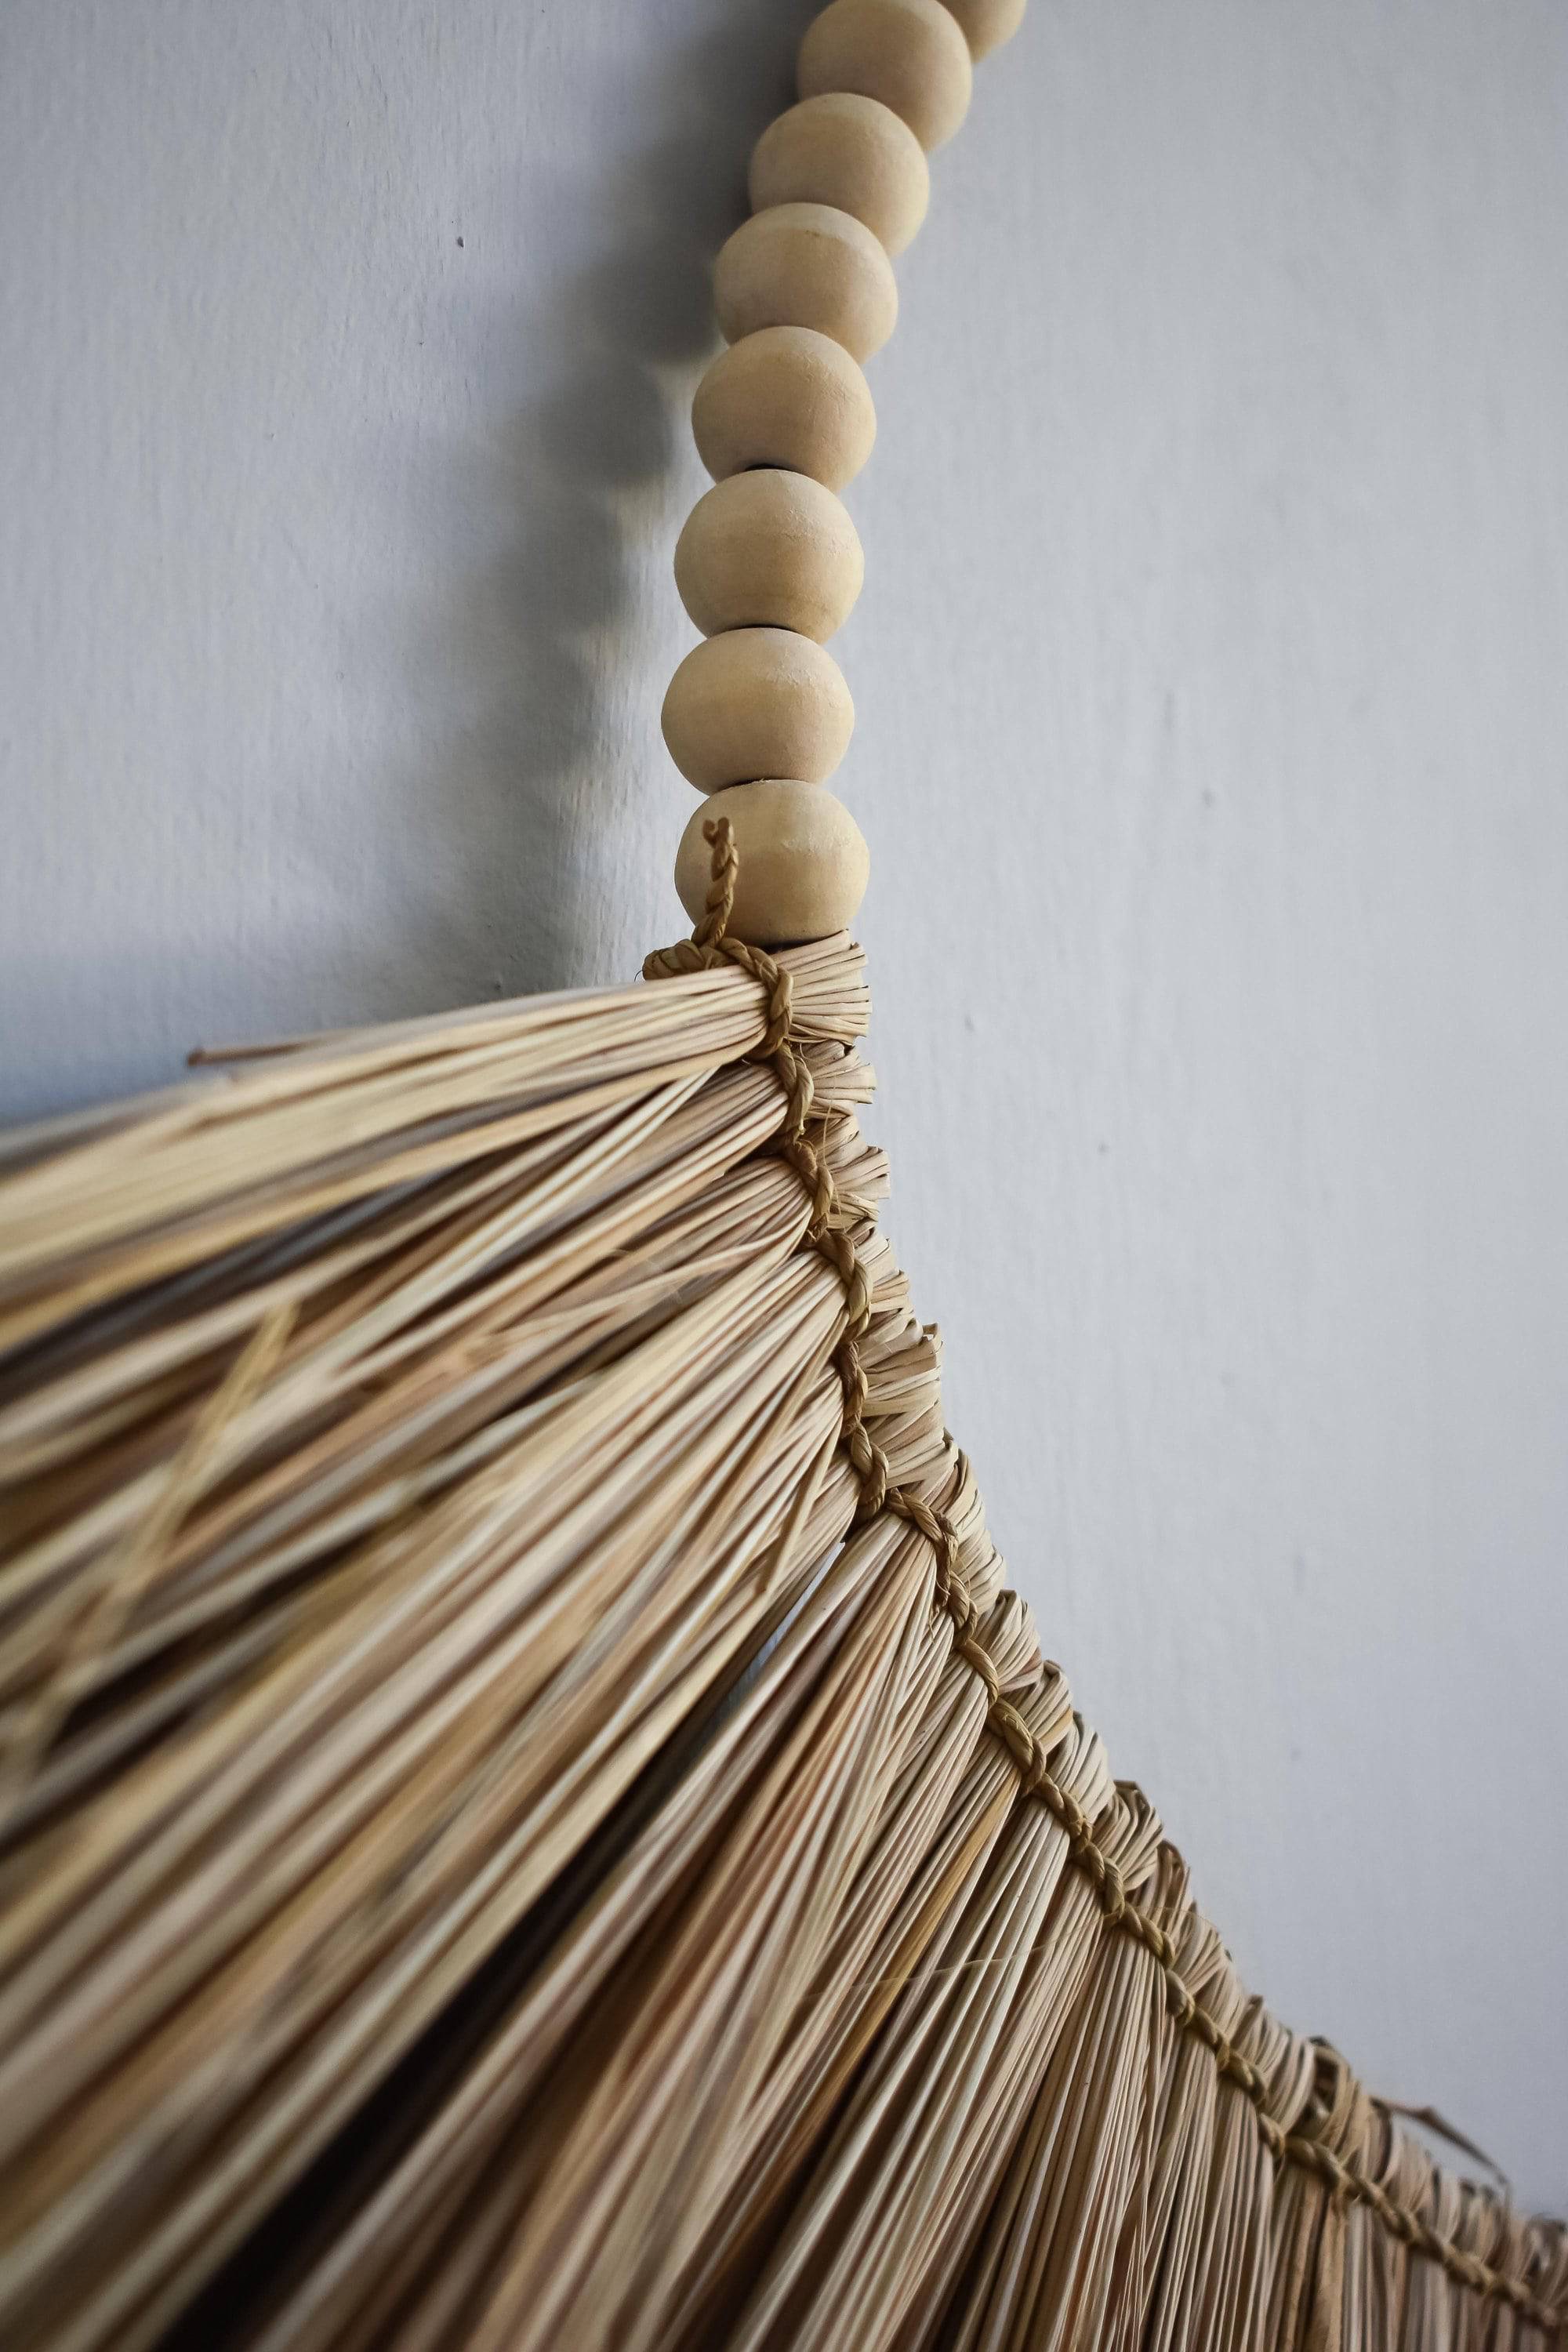 Raffia wall hanging with wooden beads - Joglo Living